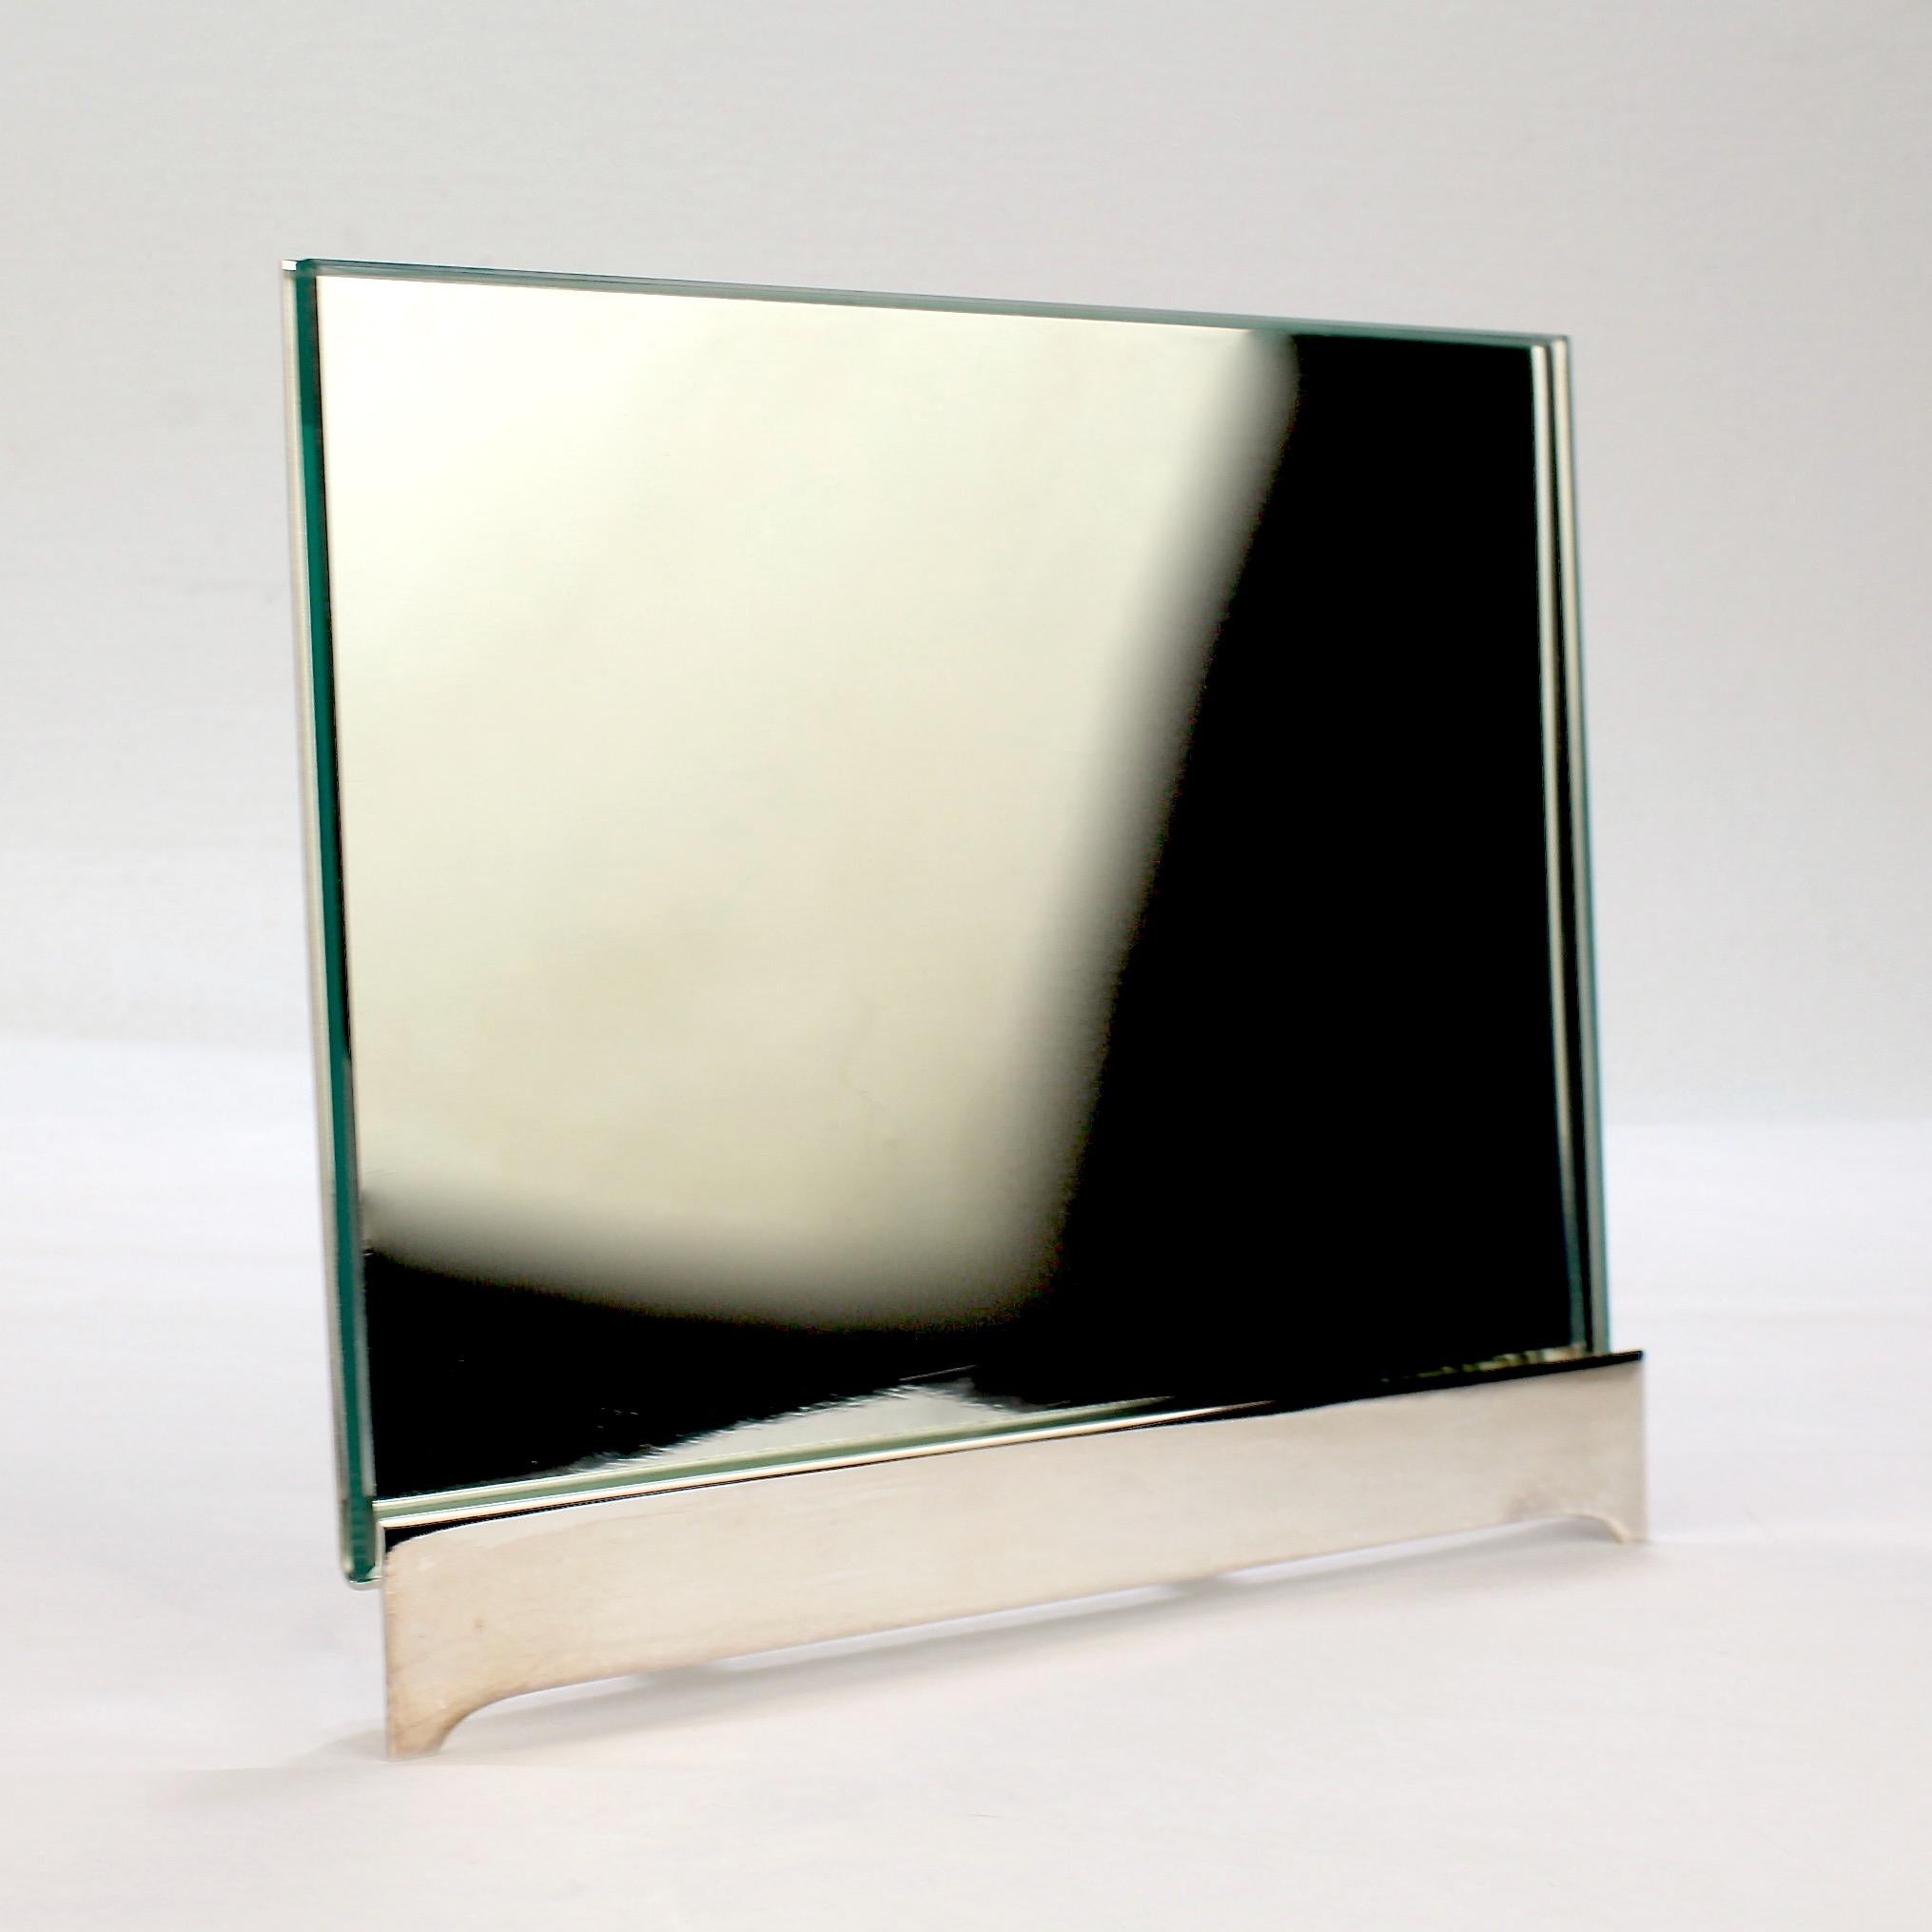 A wonderful postmodern silver-plated easel back frame.

Designed by TsAO & Mckown for Swid Powell.

Model no. 3310.

Comprising a one-piece, welded easel back frame and beveled edge rectangular glass panel.

Together with its original box and